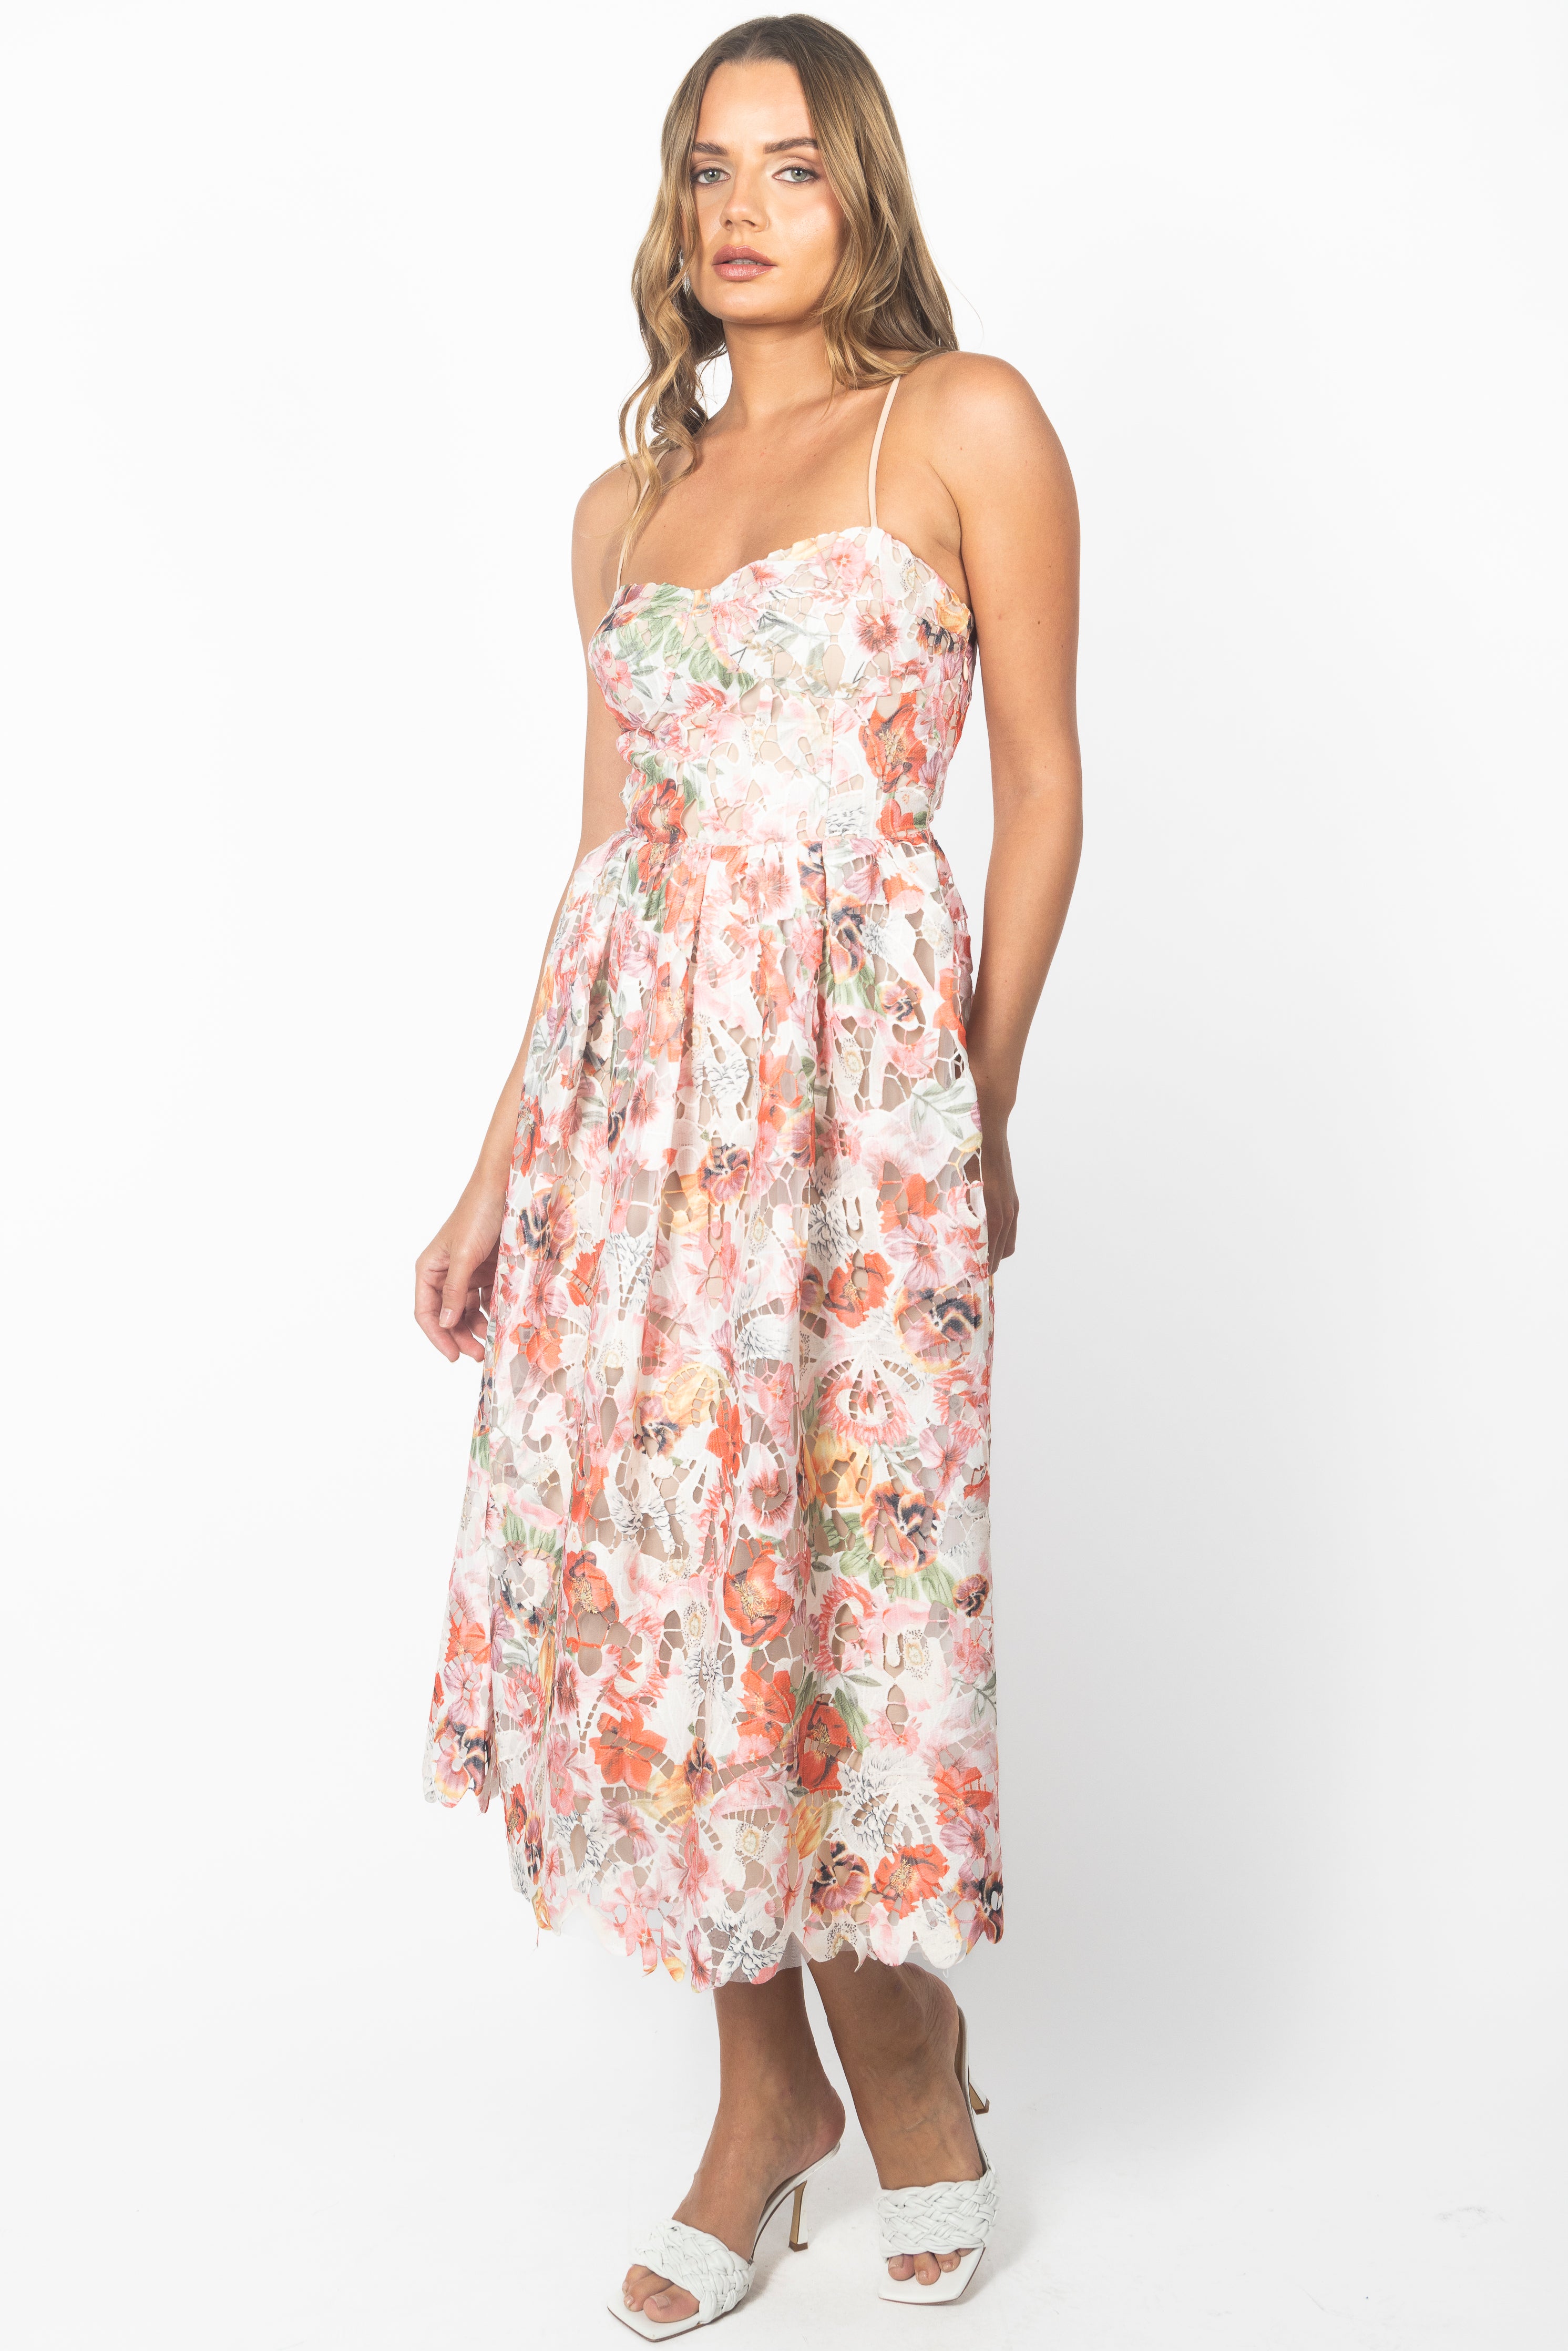 LACEY FLORAL DRESS